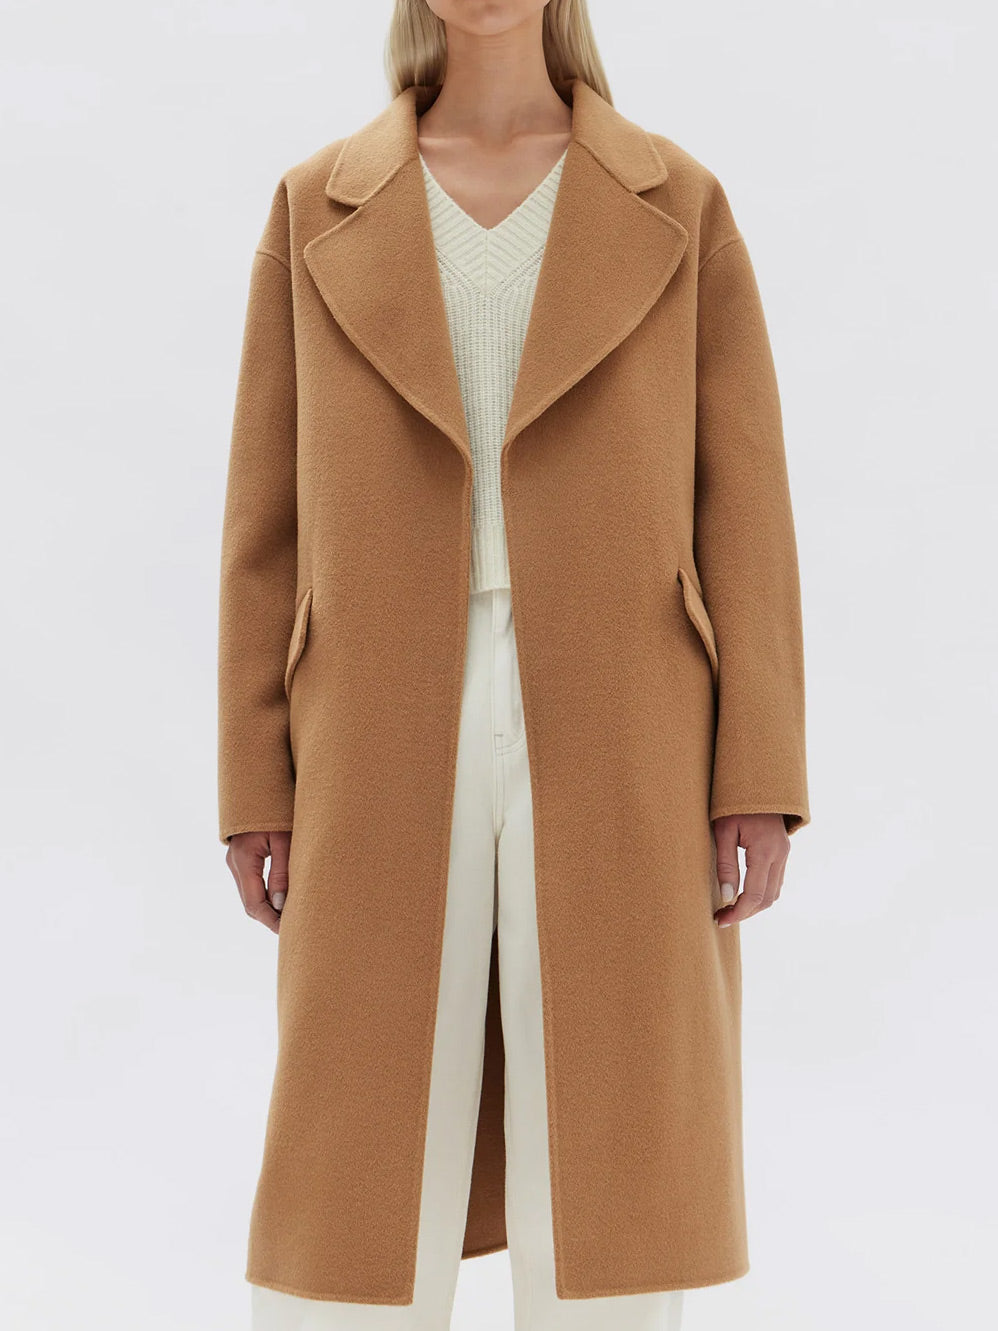 ASSEMBLY LABEL SADIE SINGLE BREASTED COAT